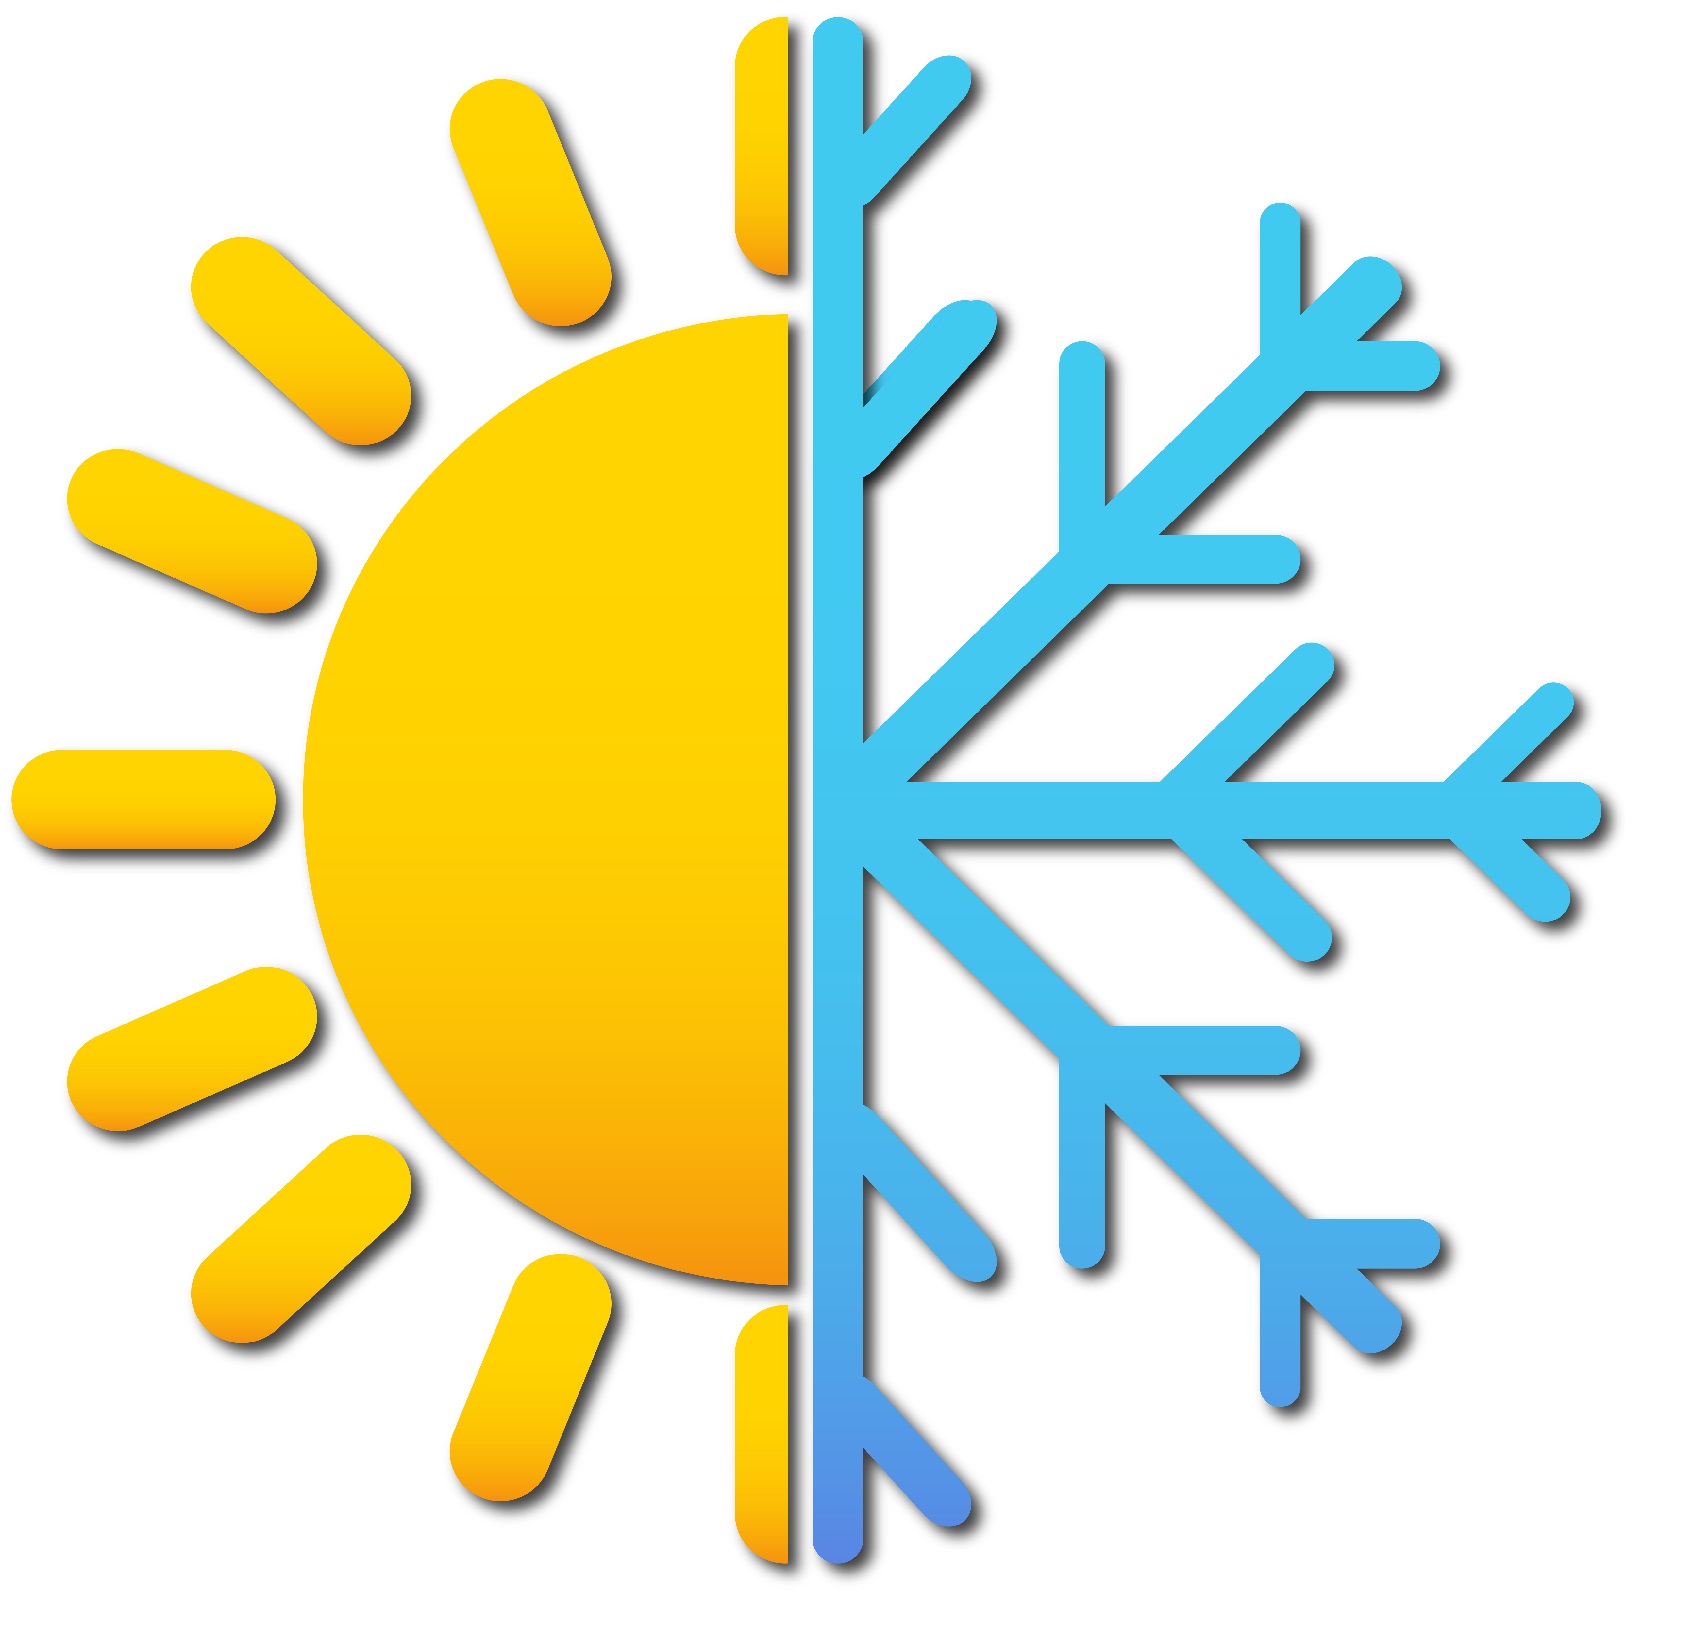 Free cooling cliparts download. Snowflake clipart sun